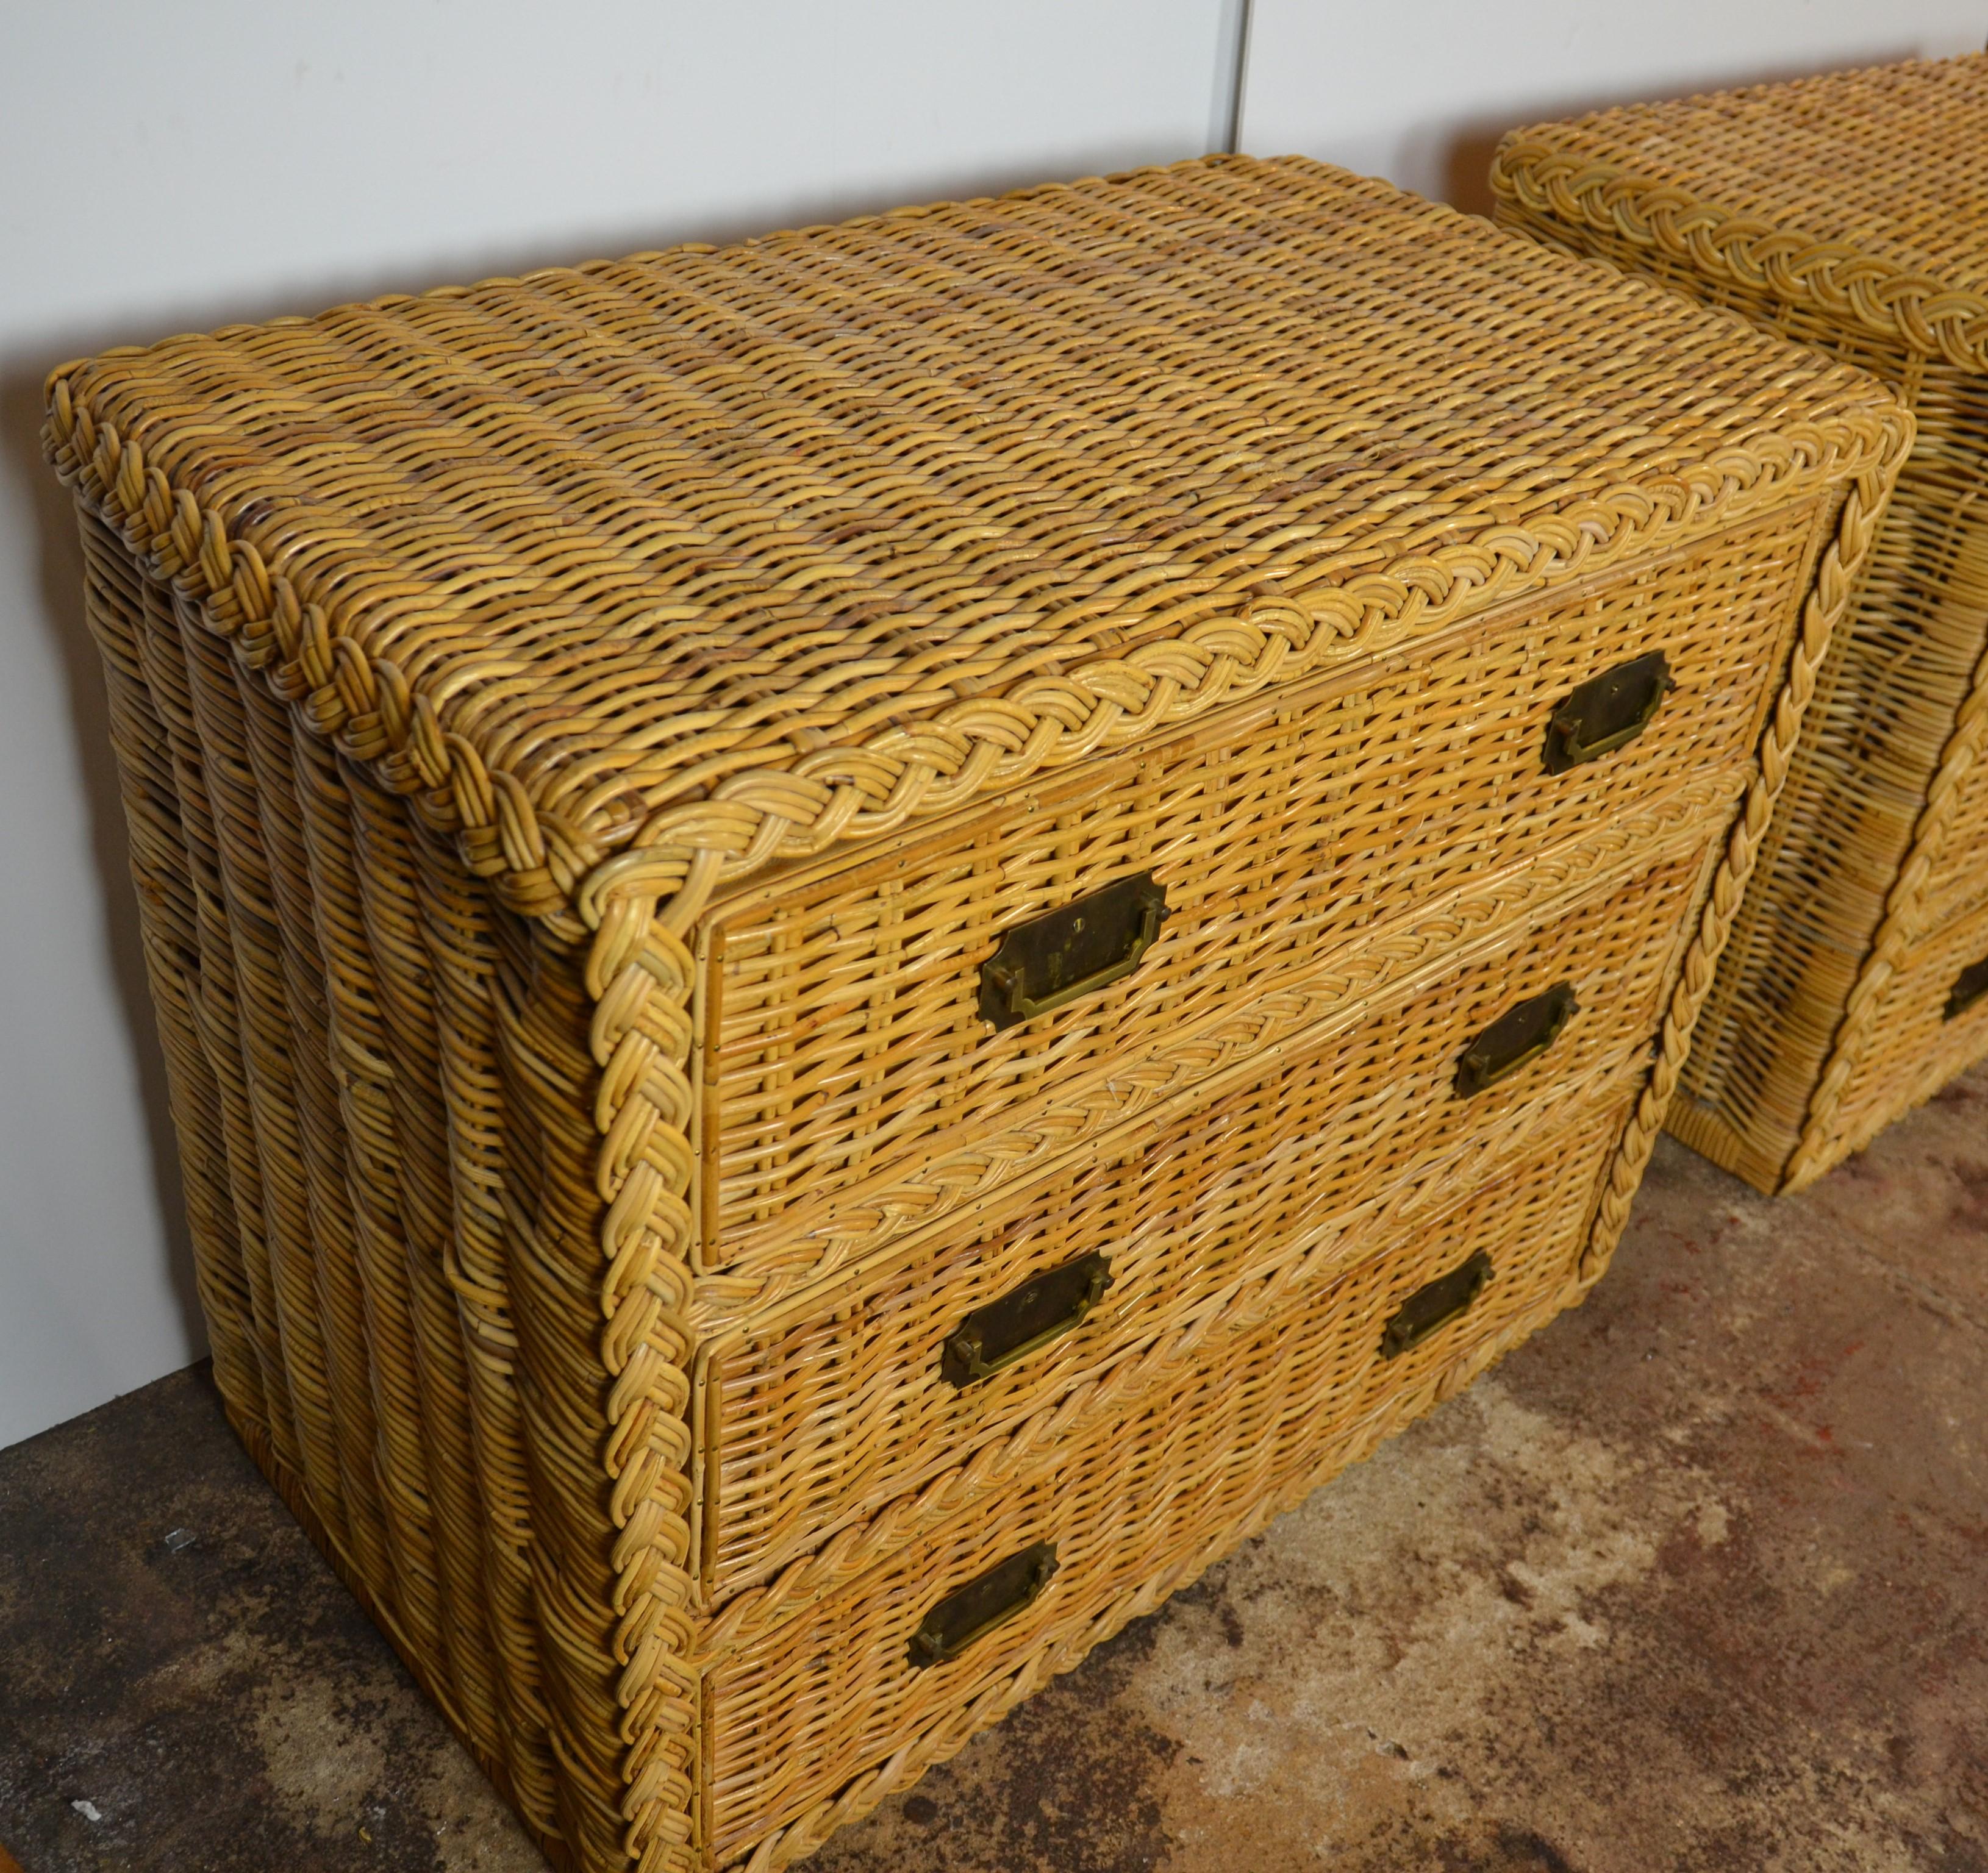 Vintage 1960s mid-century woven rattan commodes
3 drawer
Striking mid-century woven rattan dresser, c. 1960s. This stunning three-drawer basketweave reed chest is designed with brass campaign-style pulls. 

 